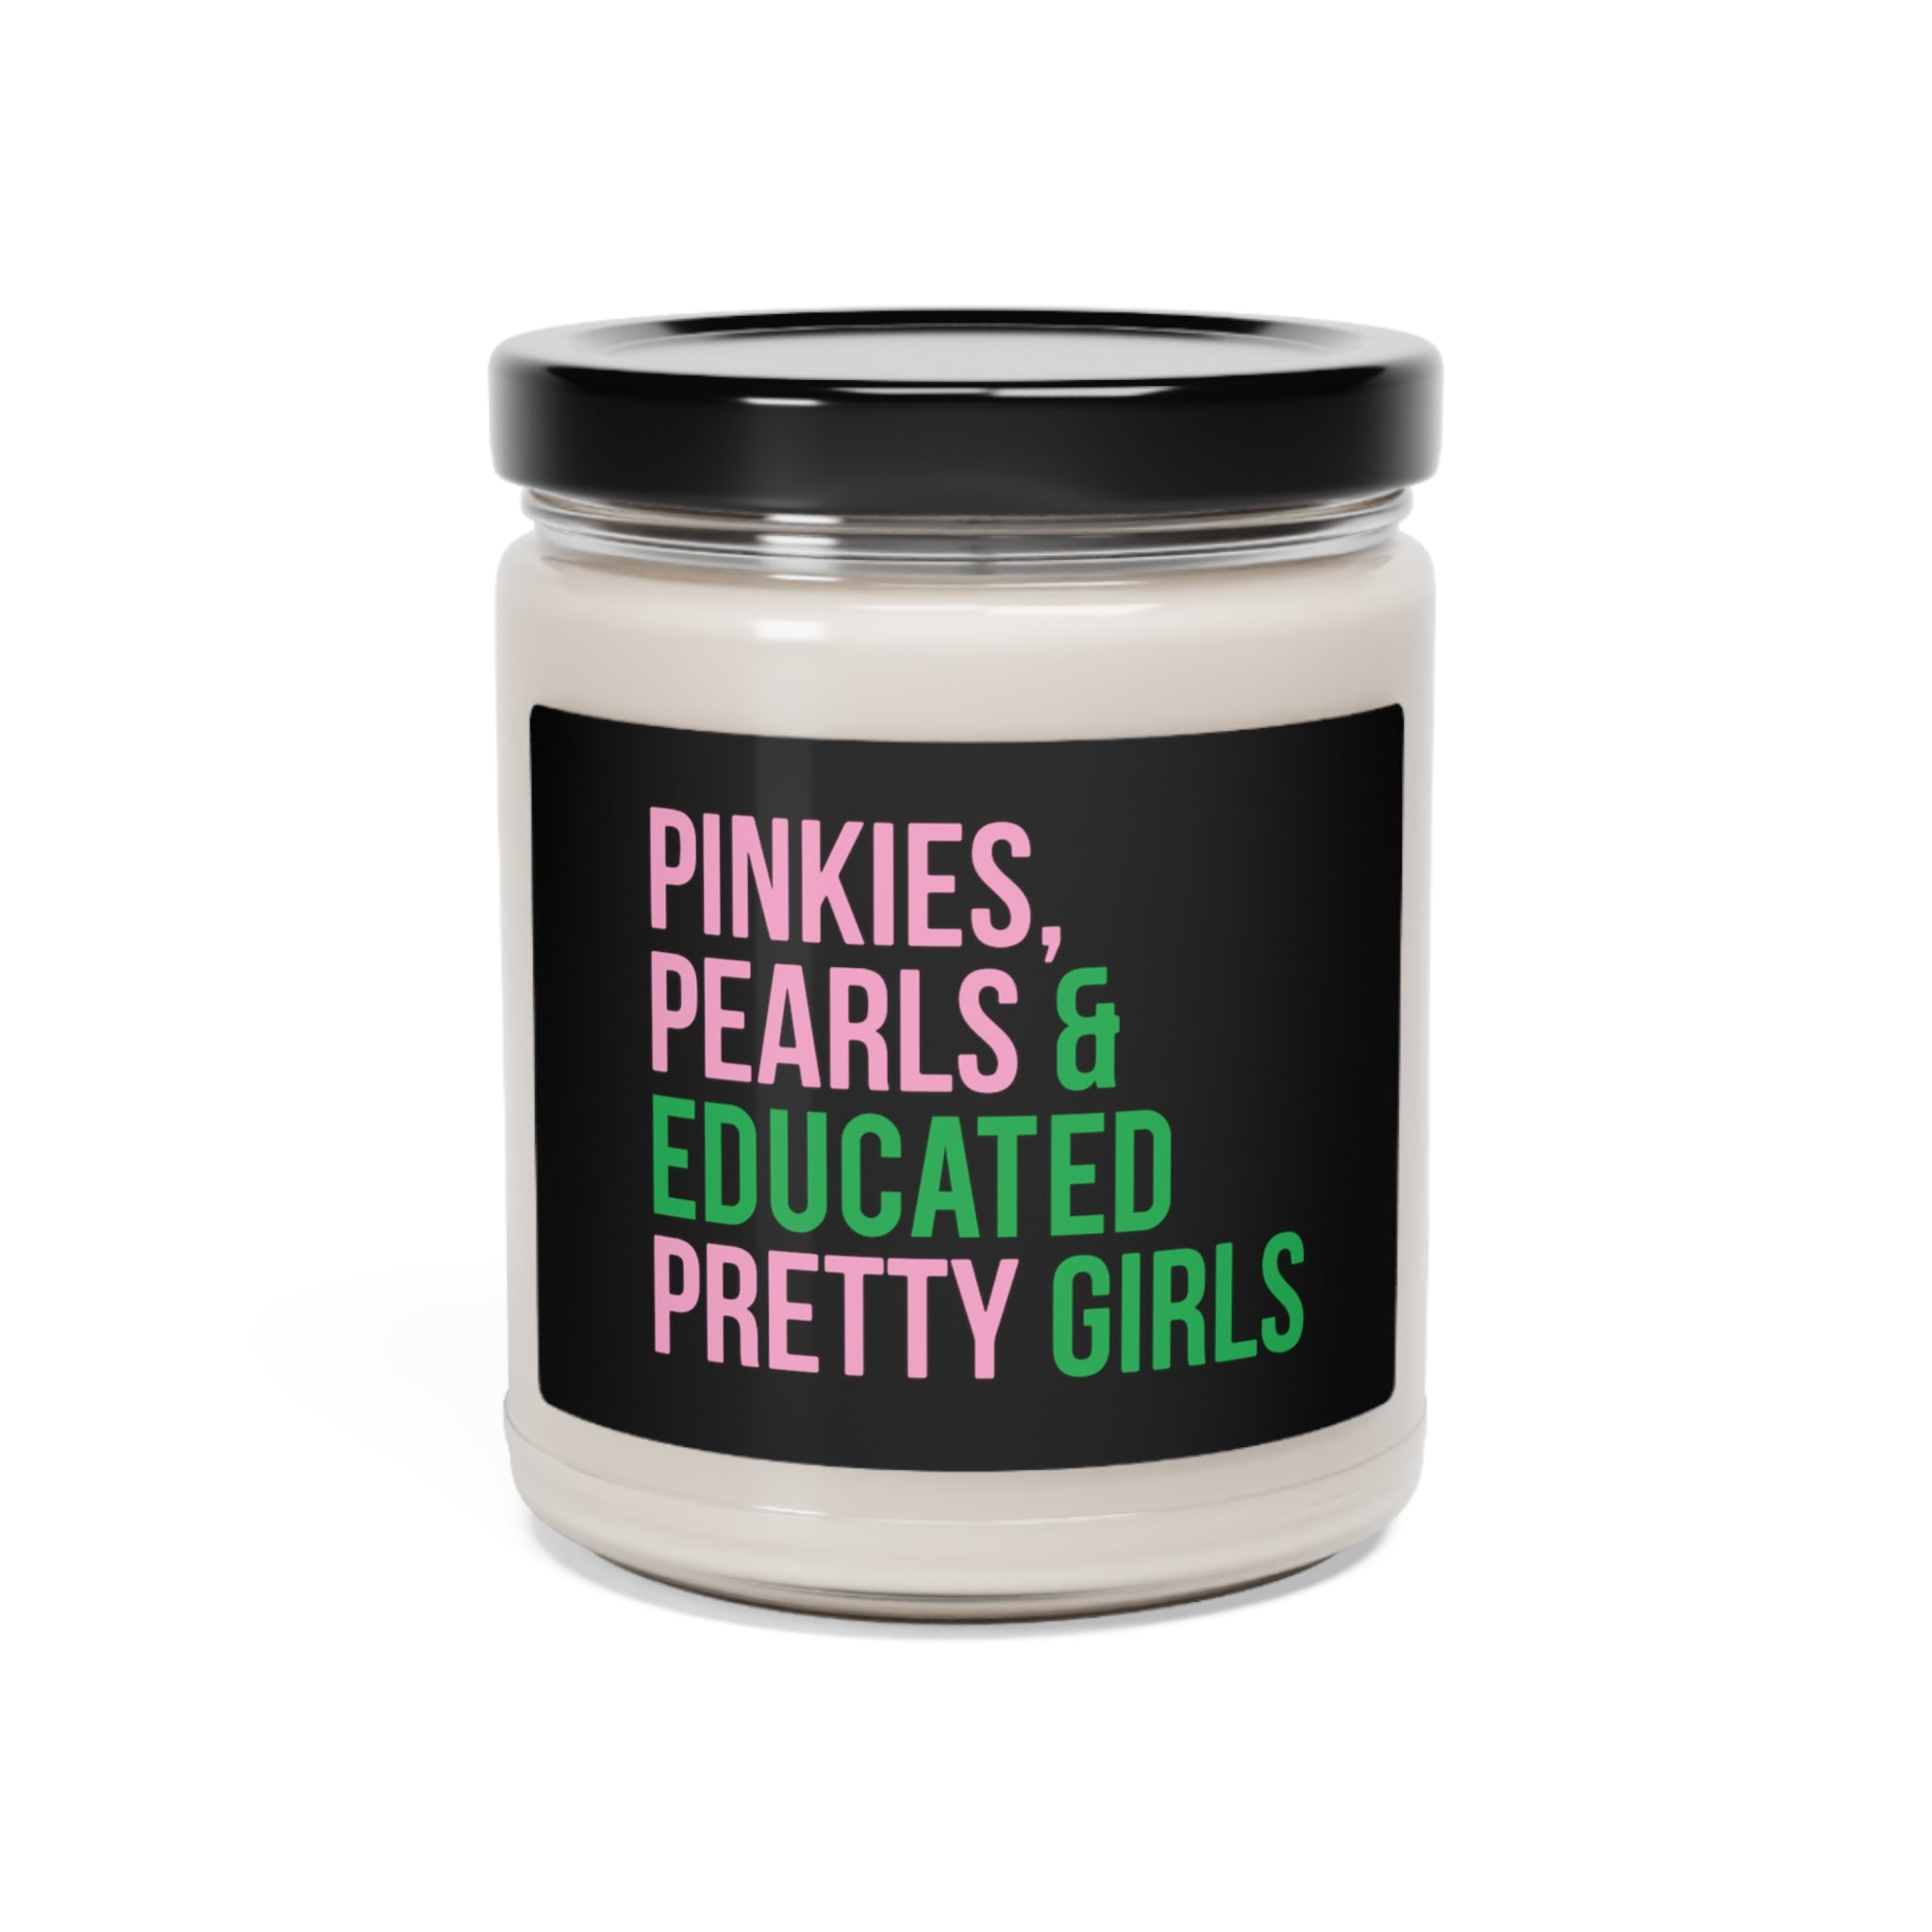 Pinkies Pearls & Educated Pretty Girls Scented Candle